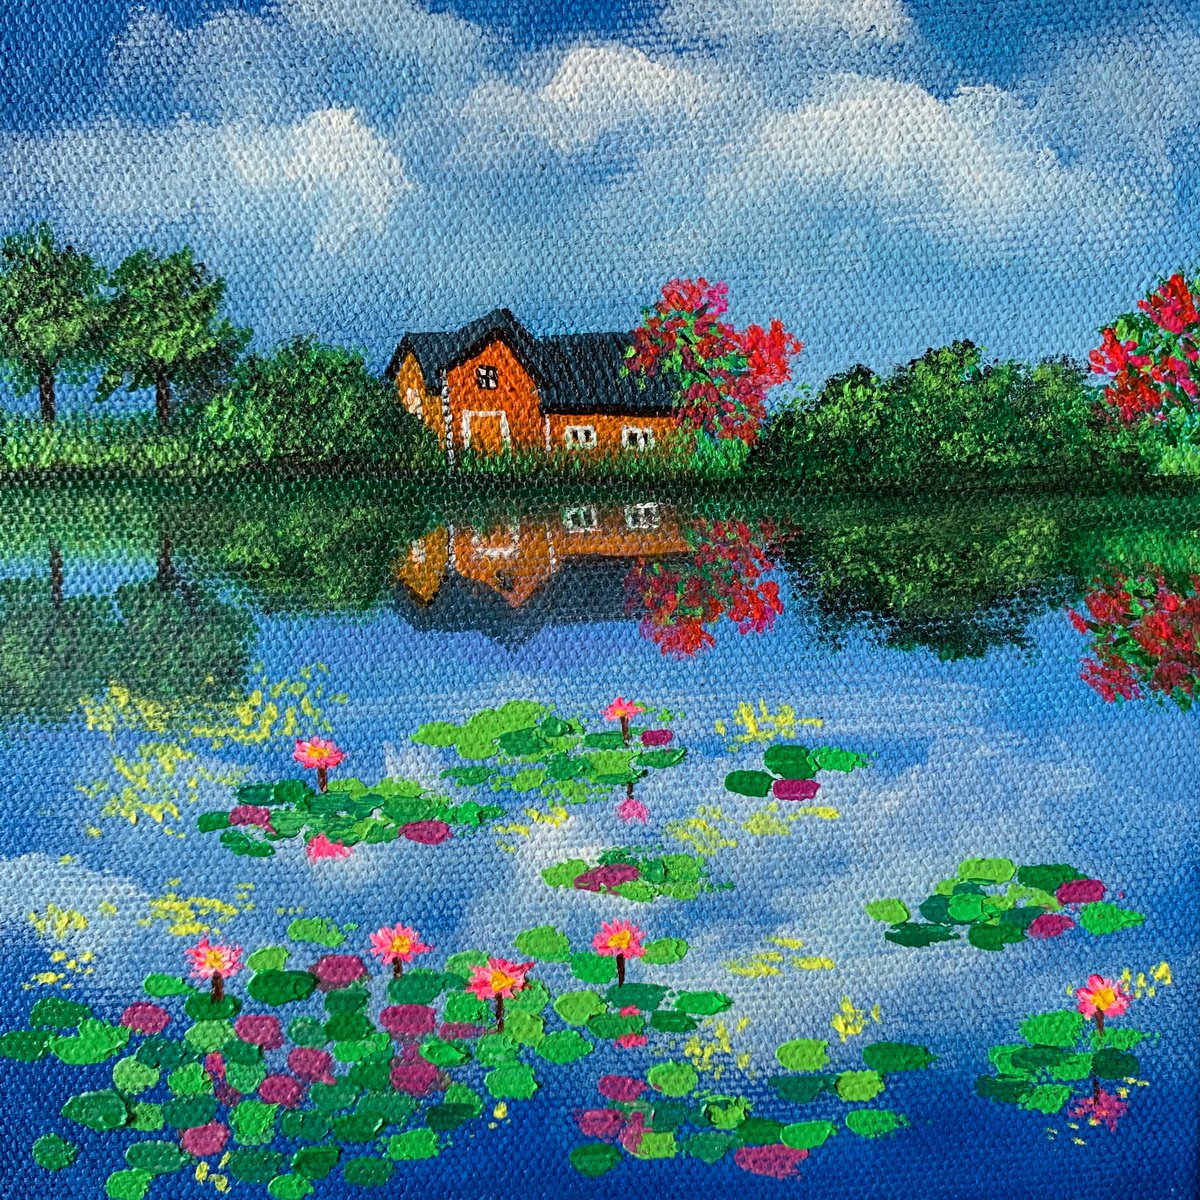 House by water lilies pond - 2 ! Small Painting!! Ready to hang by Amita Dand